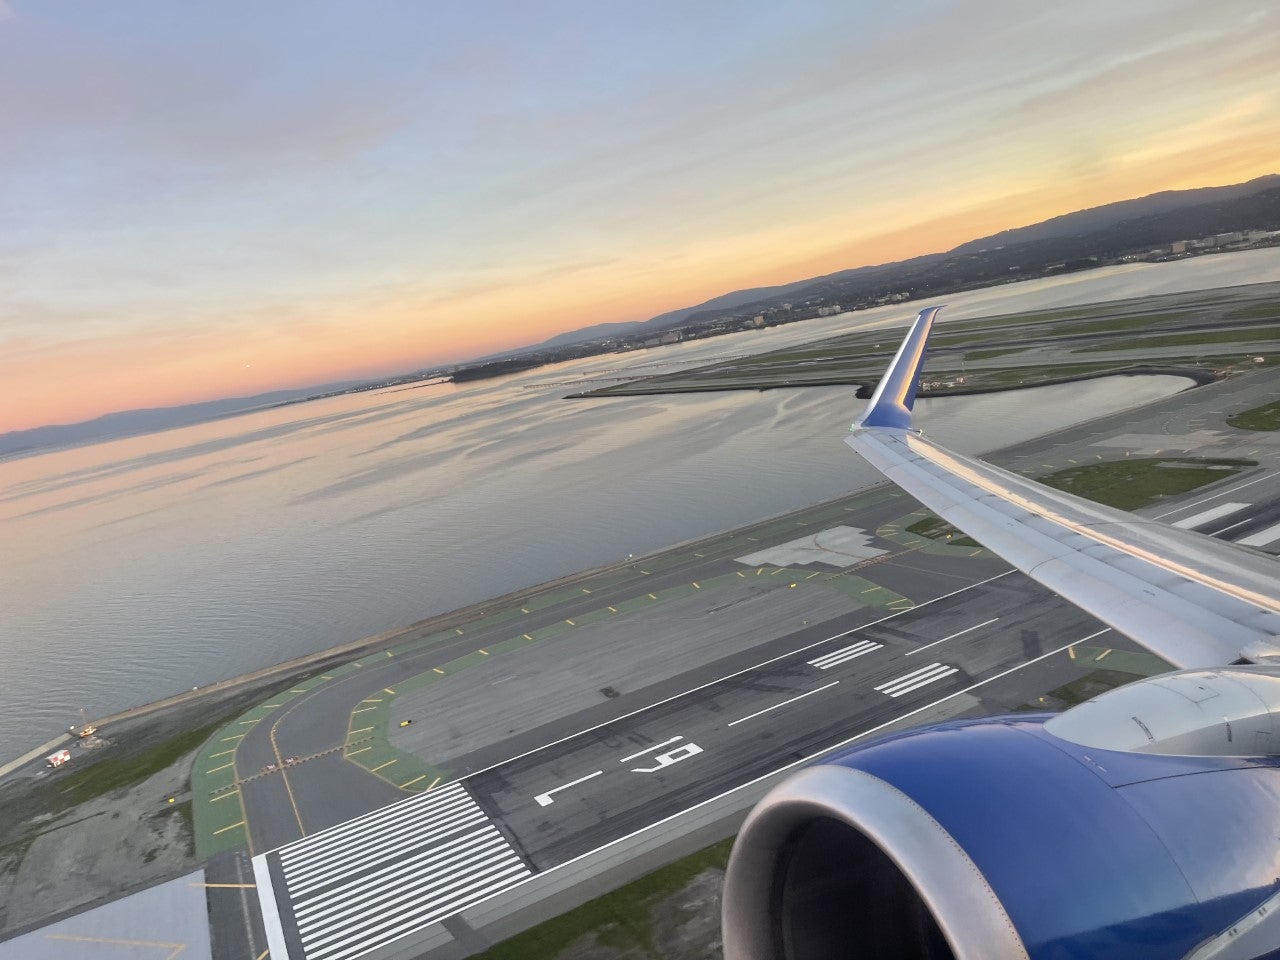 United Airlines Boeing 737-800 takeoff from SFO sunset